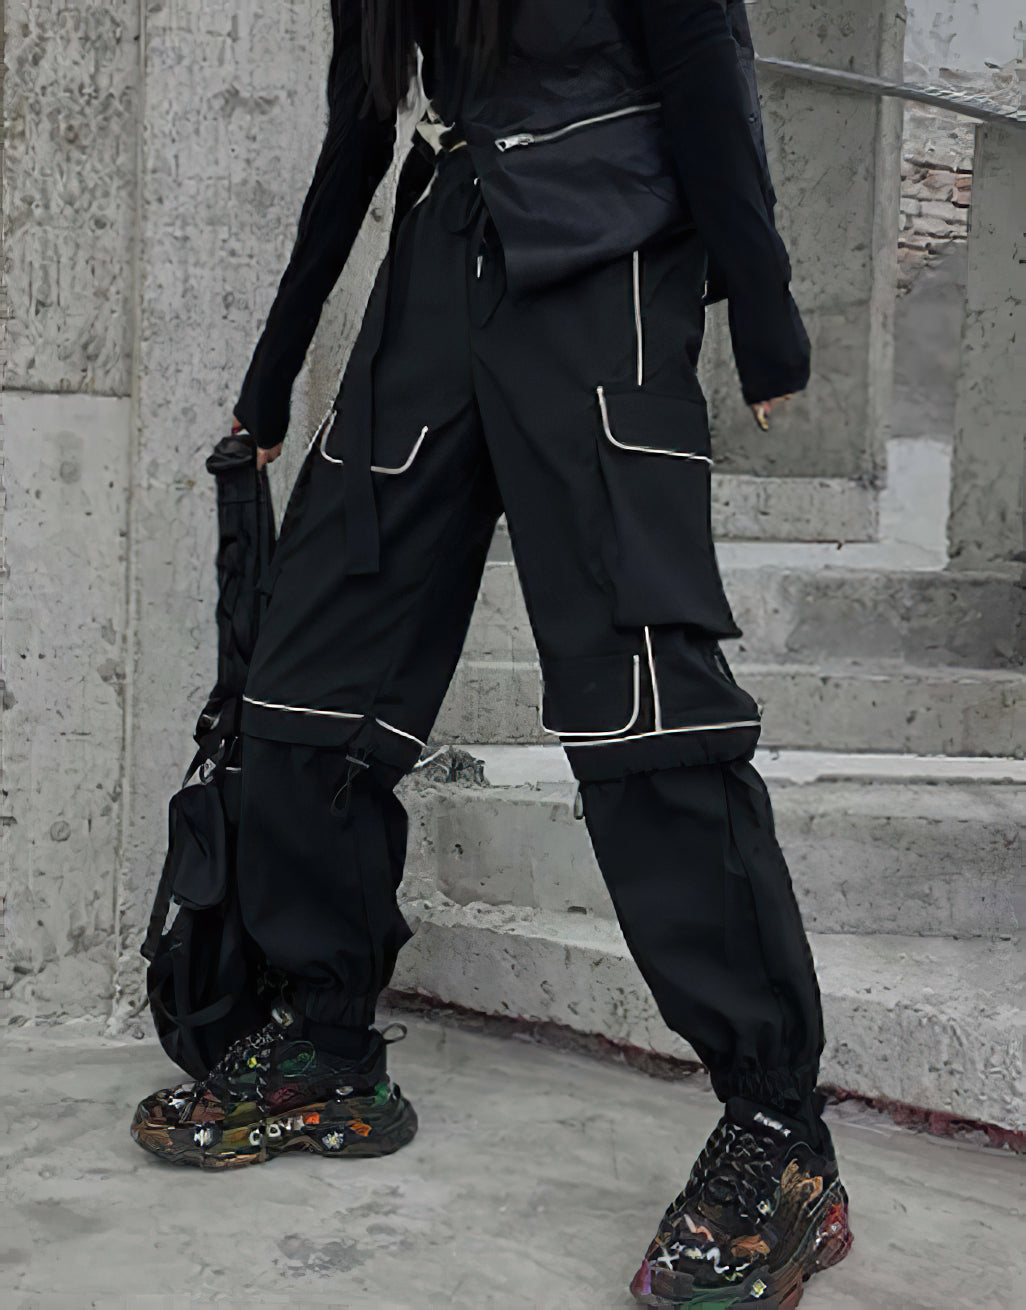 DICKIES - Men's Double Knee pants with reflective details - GH-Stores.com